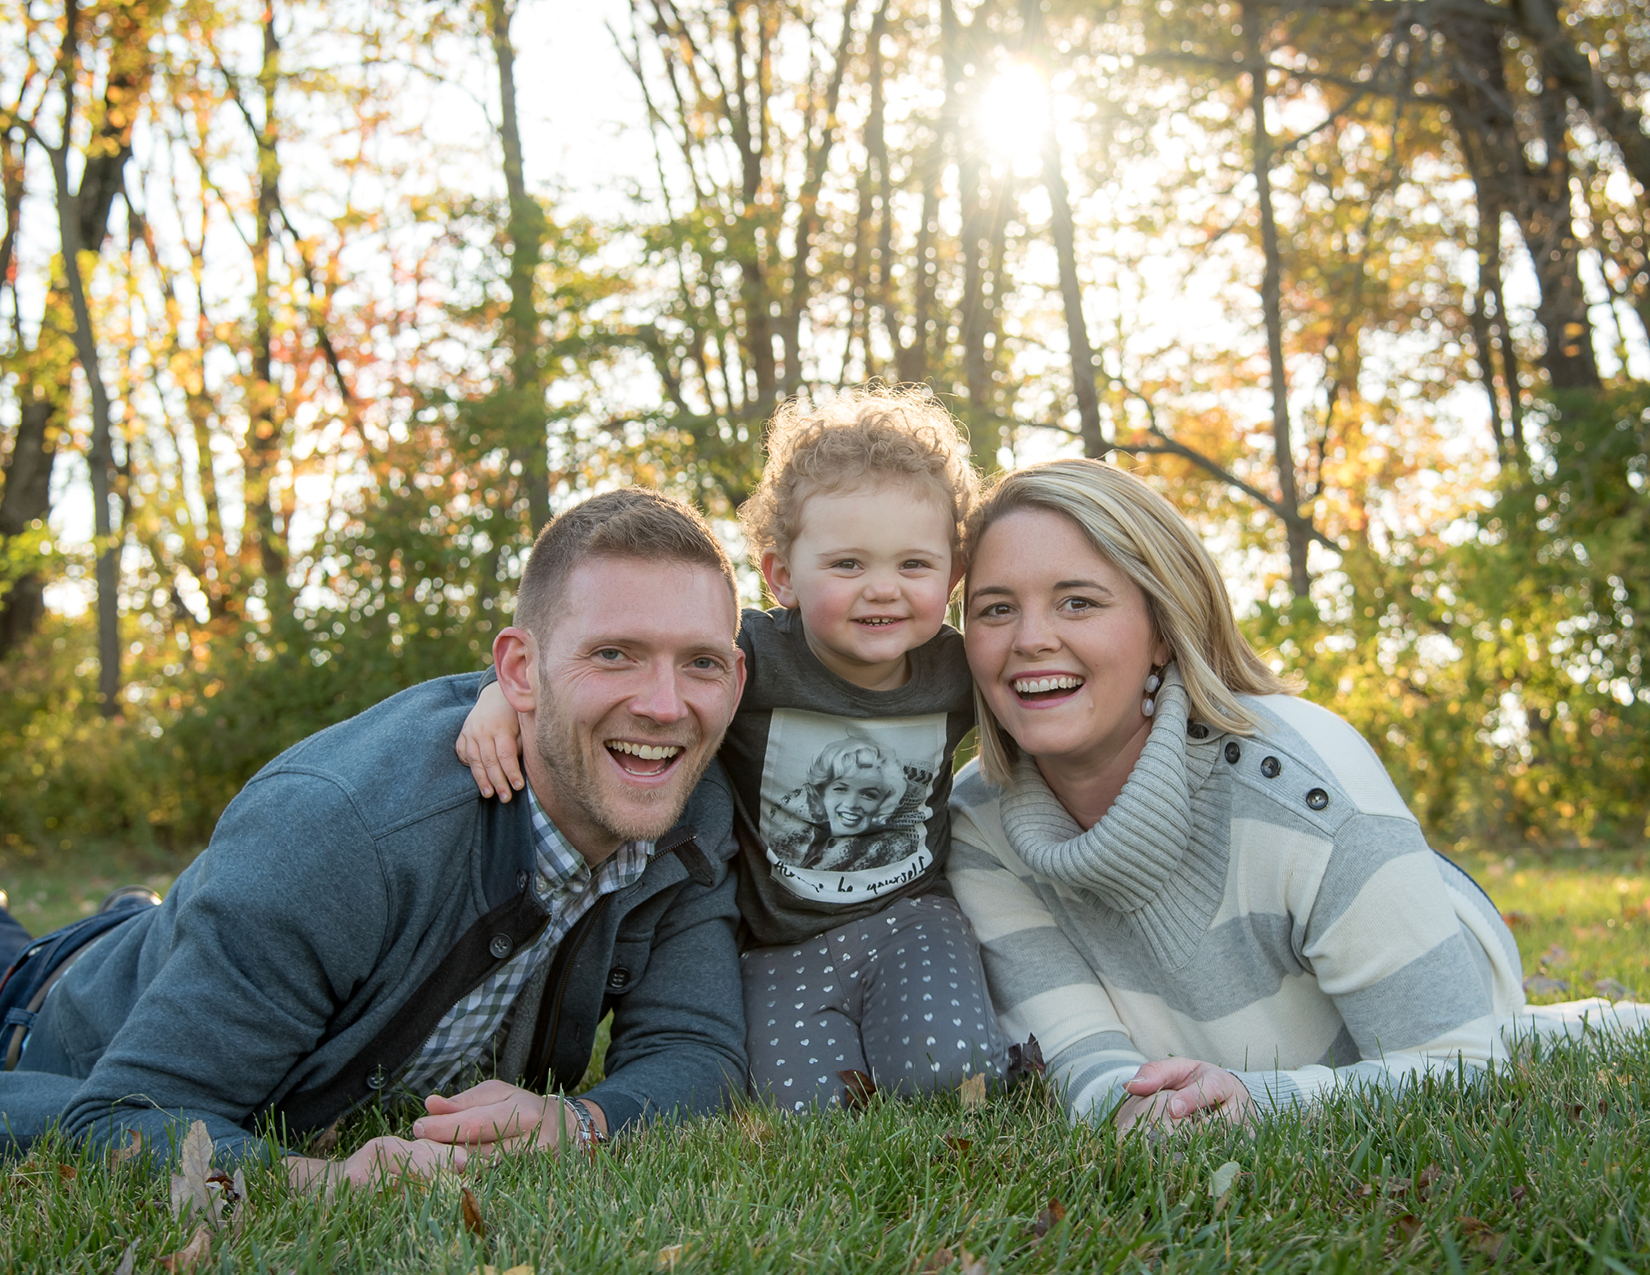 Fall Family Mini Sessions – Michelle Lala Clark Photography1650 x 1275